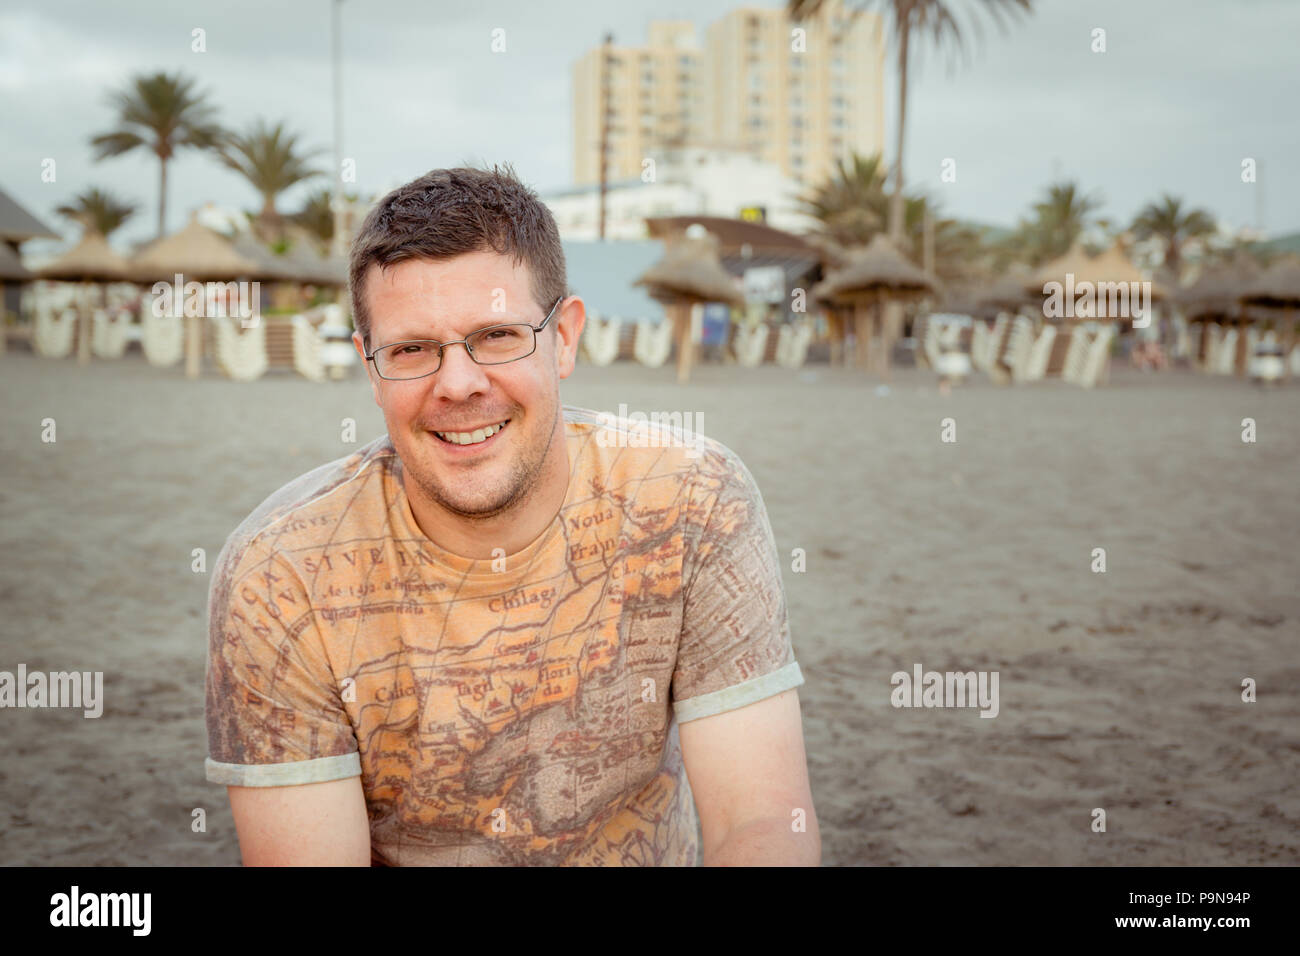 Portrait of a Caucasian man in thirties or forties with brown hair, glasses, stubble wearing a vintage map tshirt on a deserted beach in the evening Stock Photo